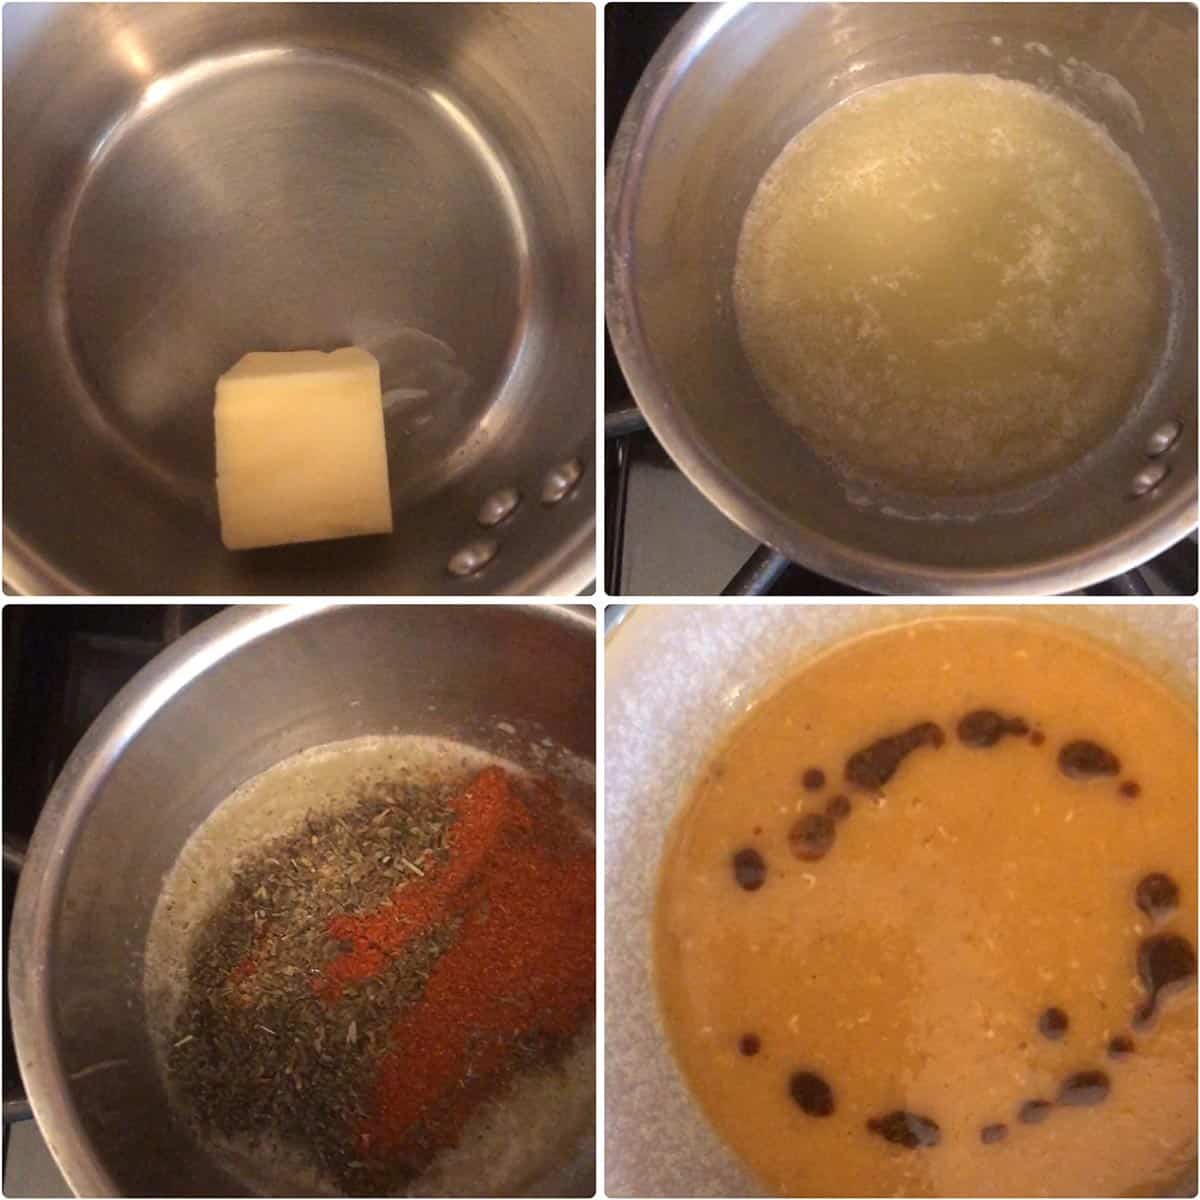 Making spiced butter in a small bowl